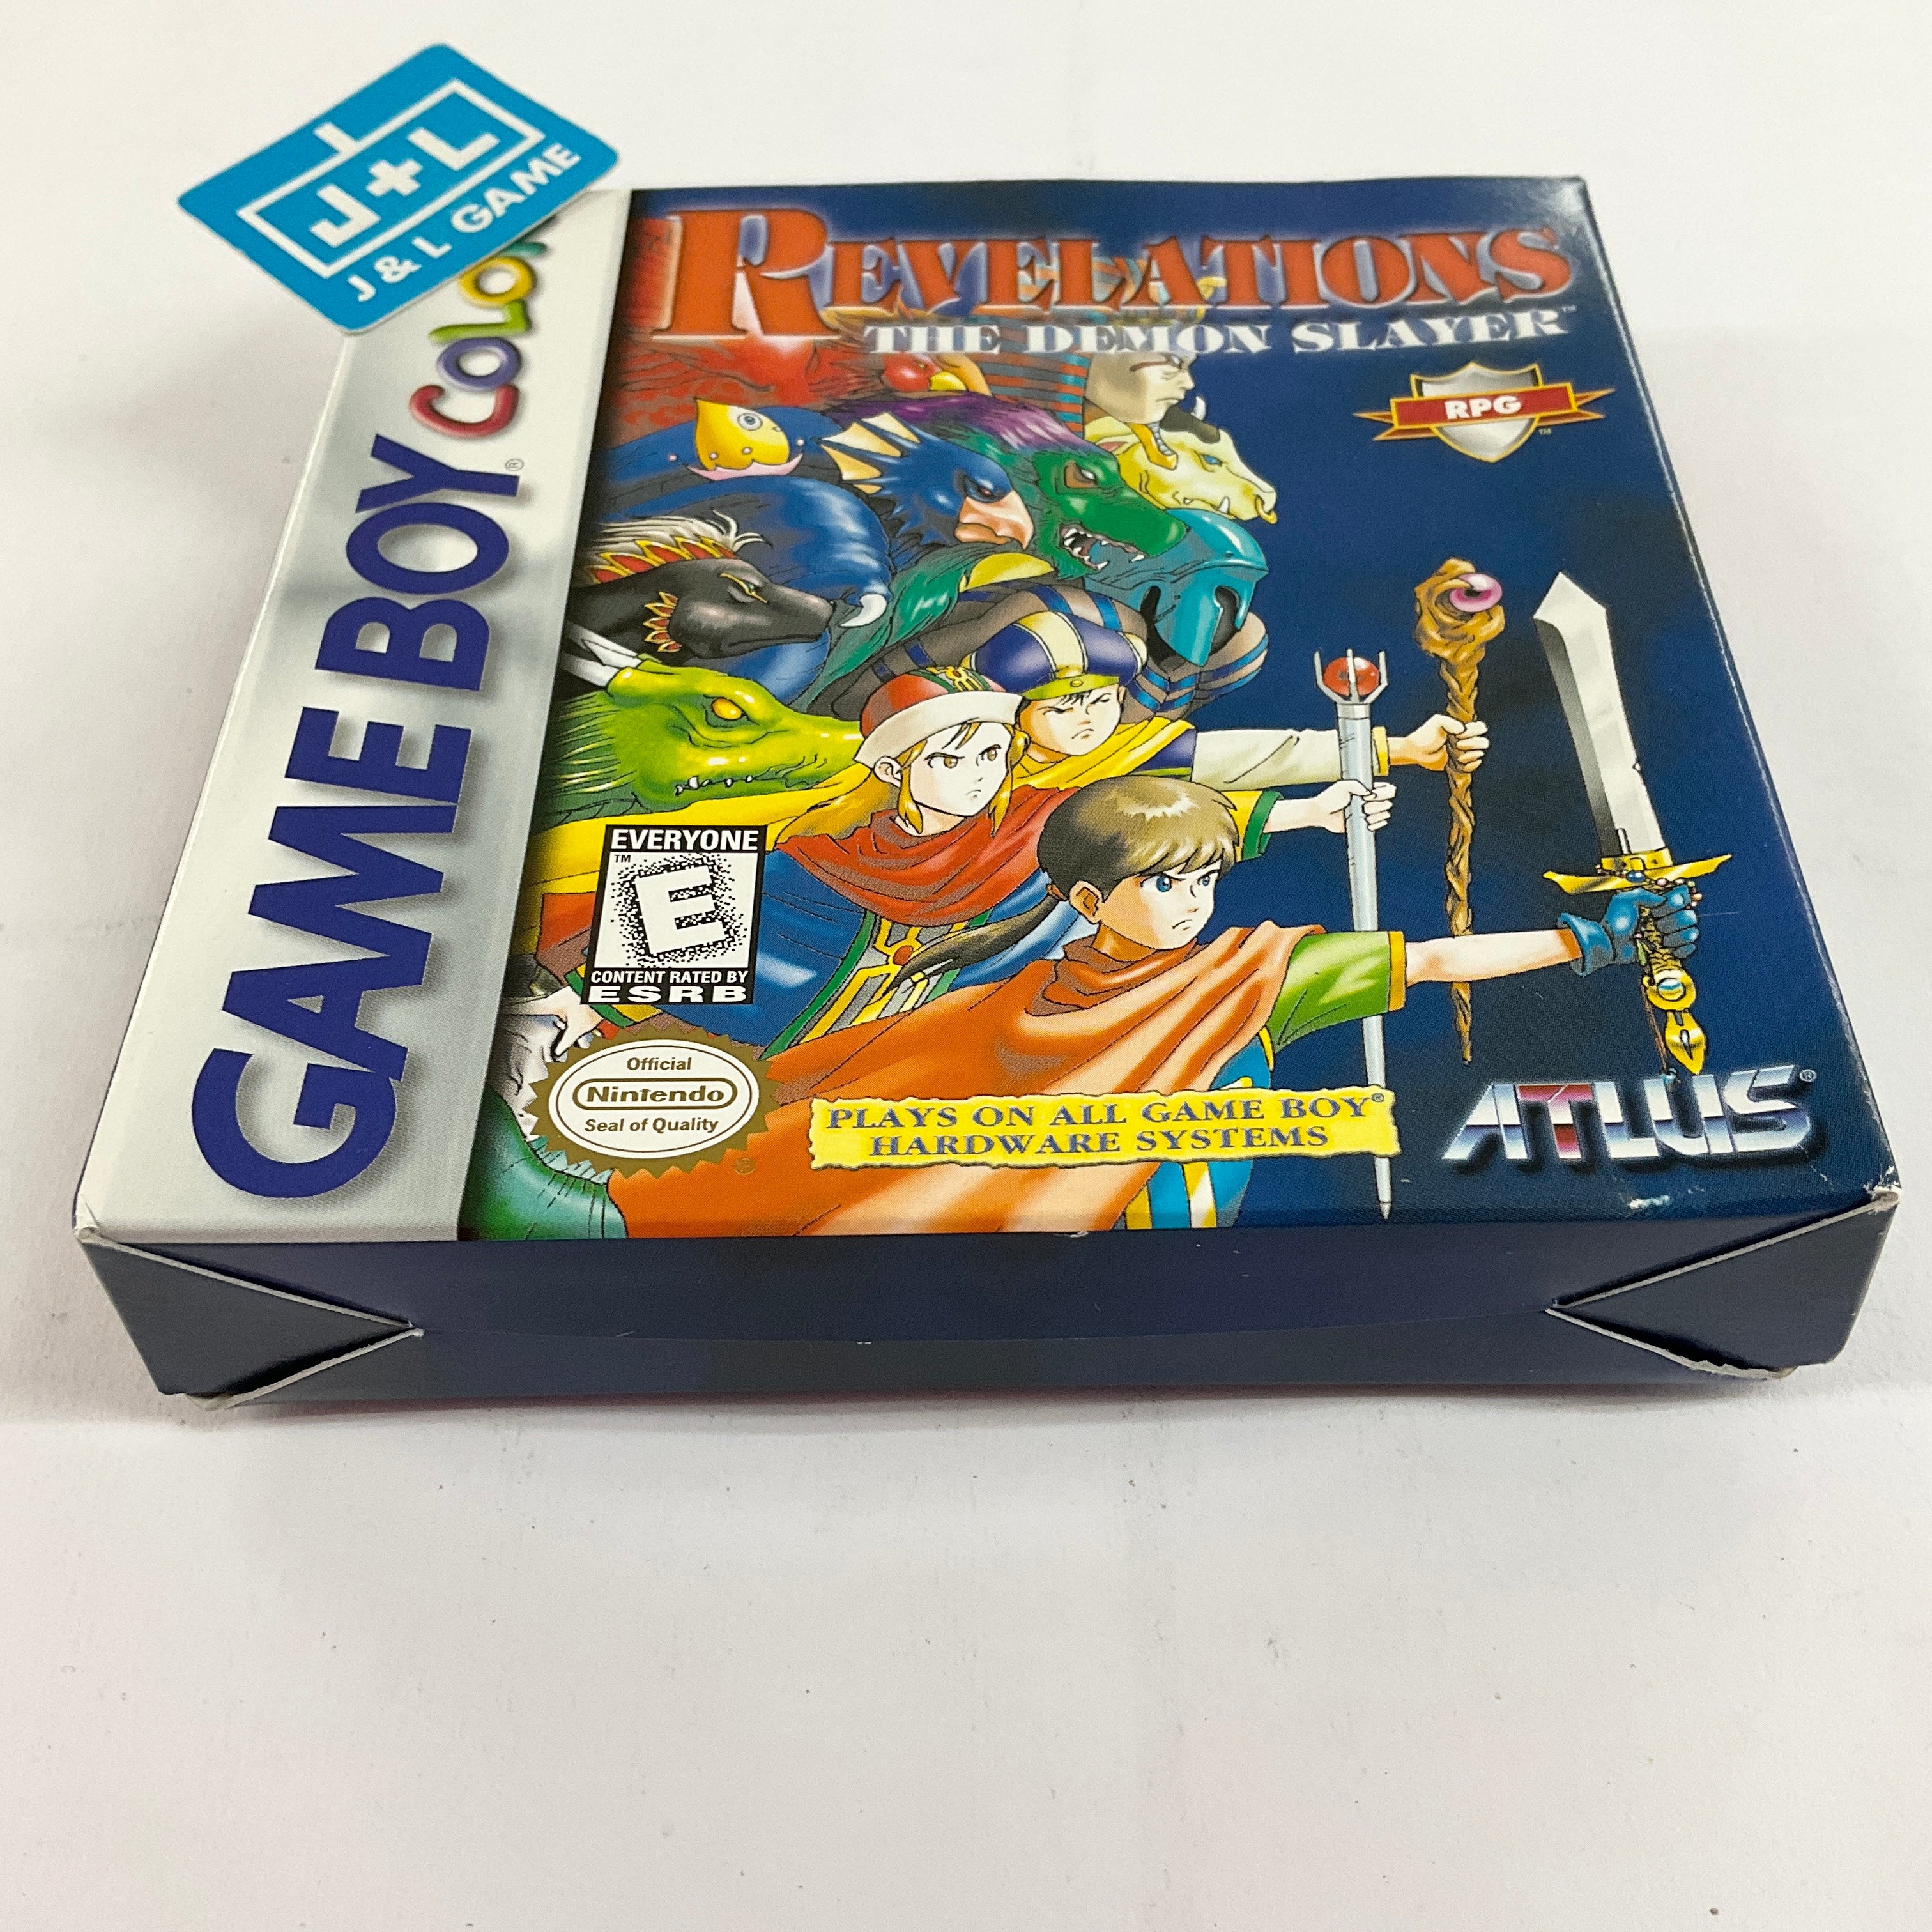 Revelations: The Demon Slayer - (GBC) Game Boy Color [Pre-Owned] Video Games Atlus   